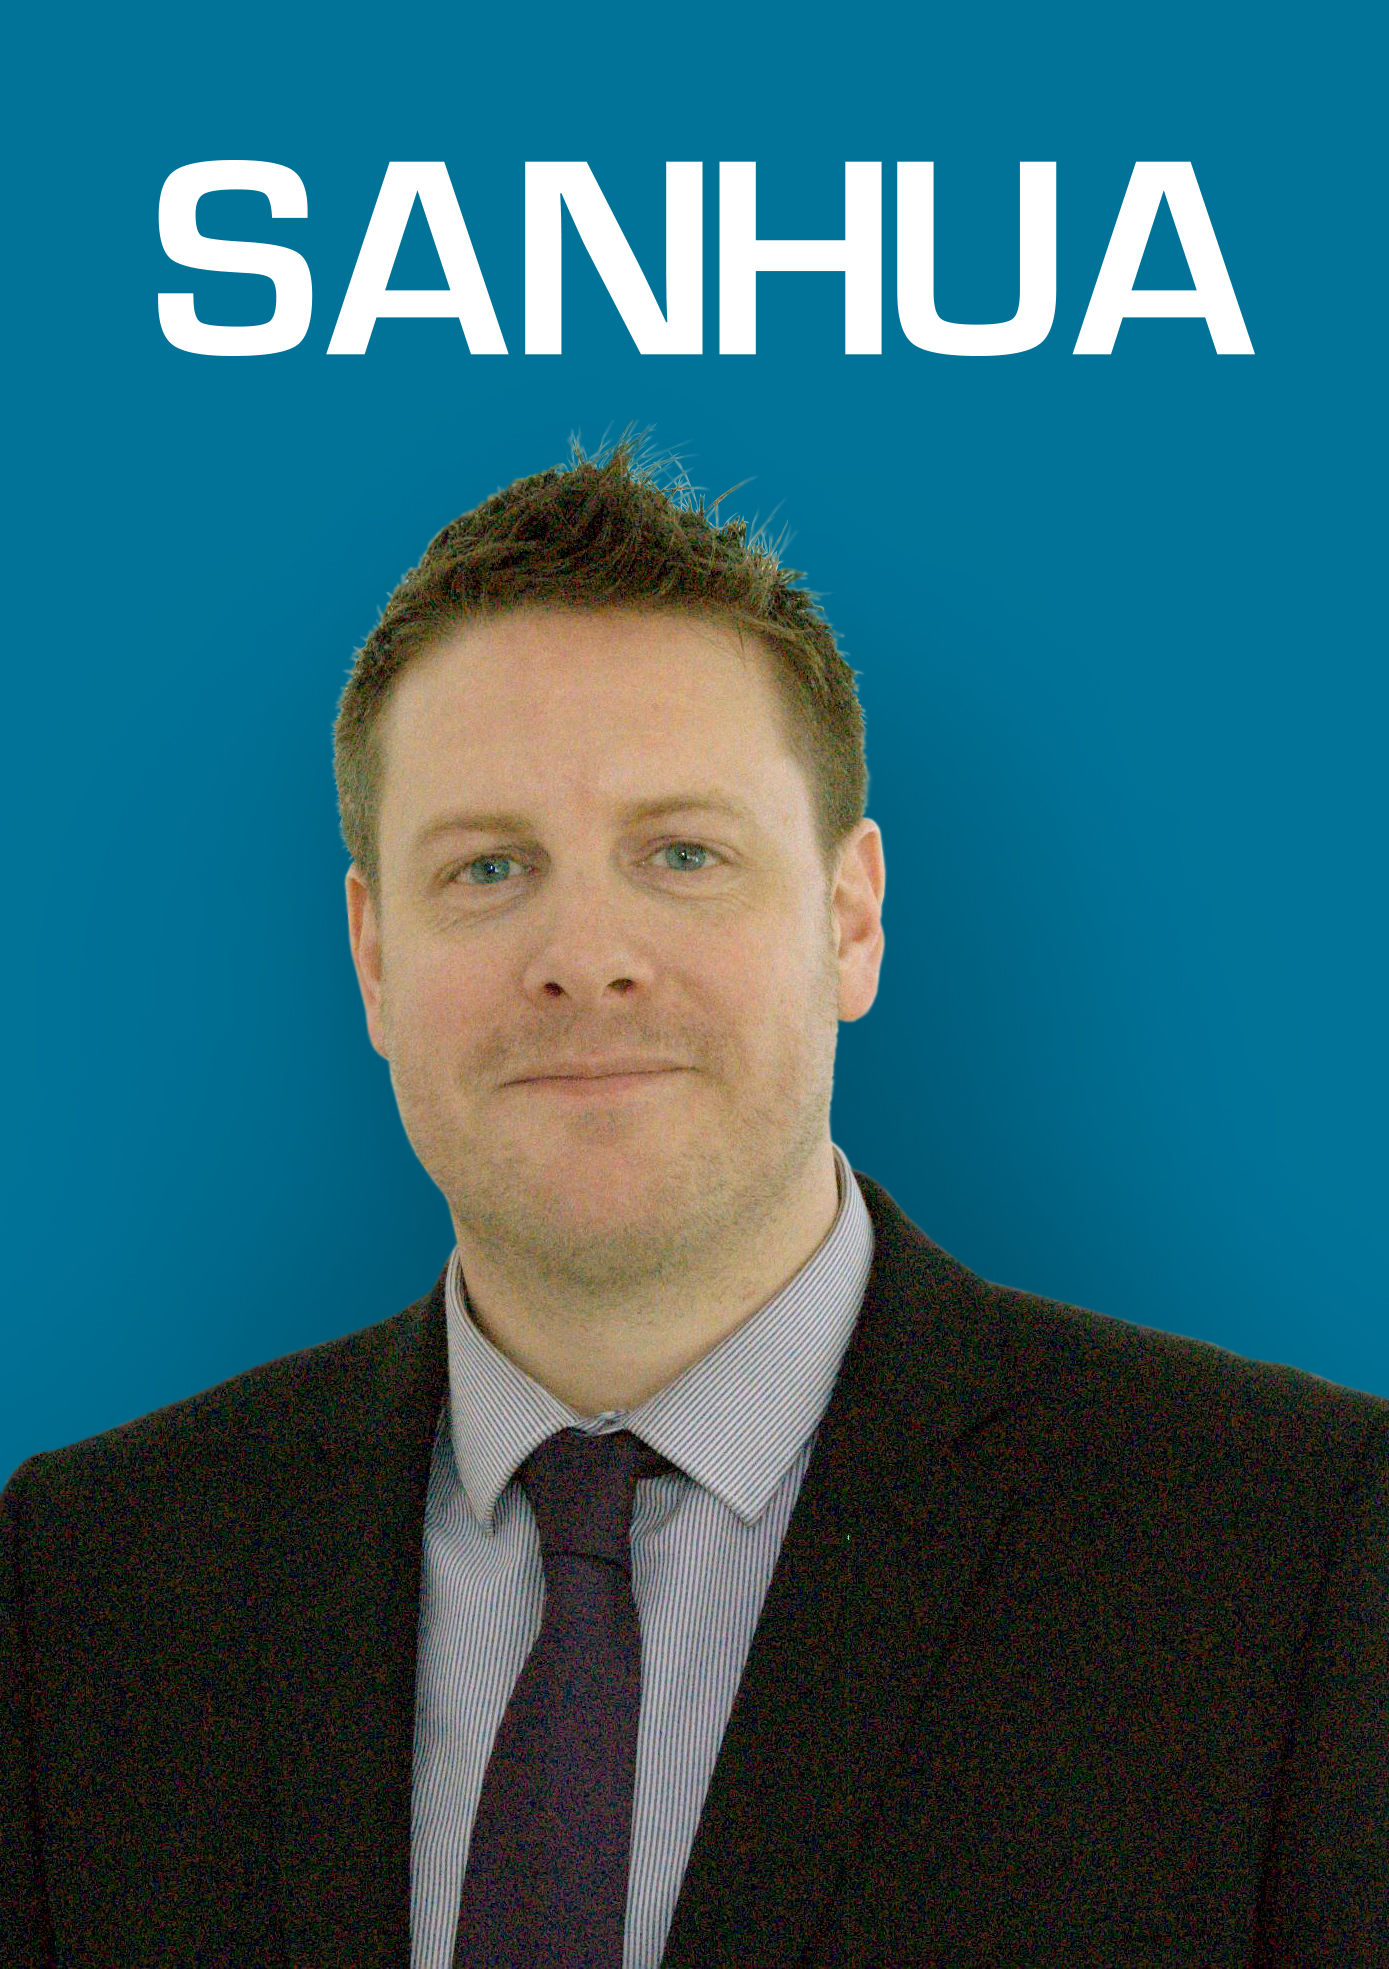 Sanhua welcomes Neil Panting as the new Sales Manager for the UK, Ireland & Scandinavia.  